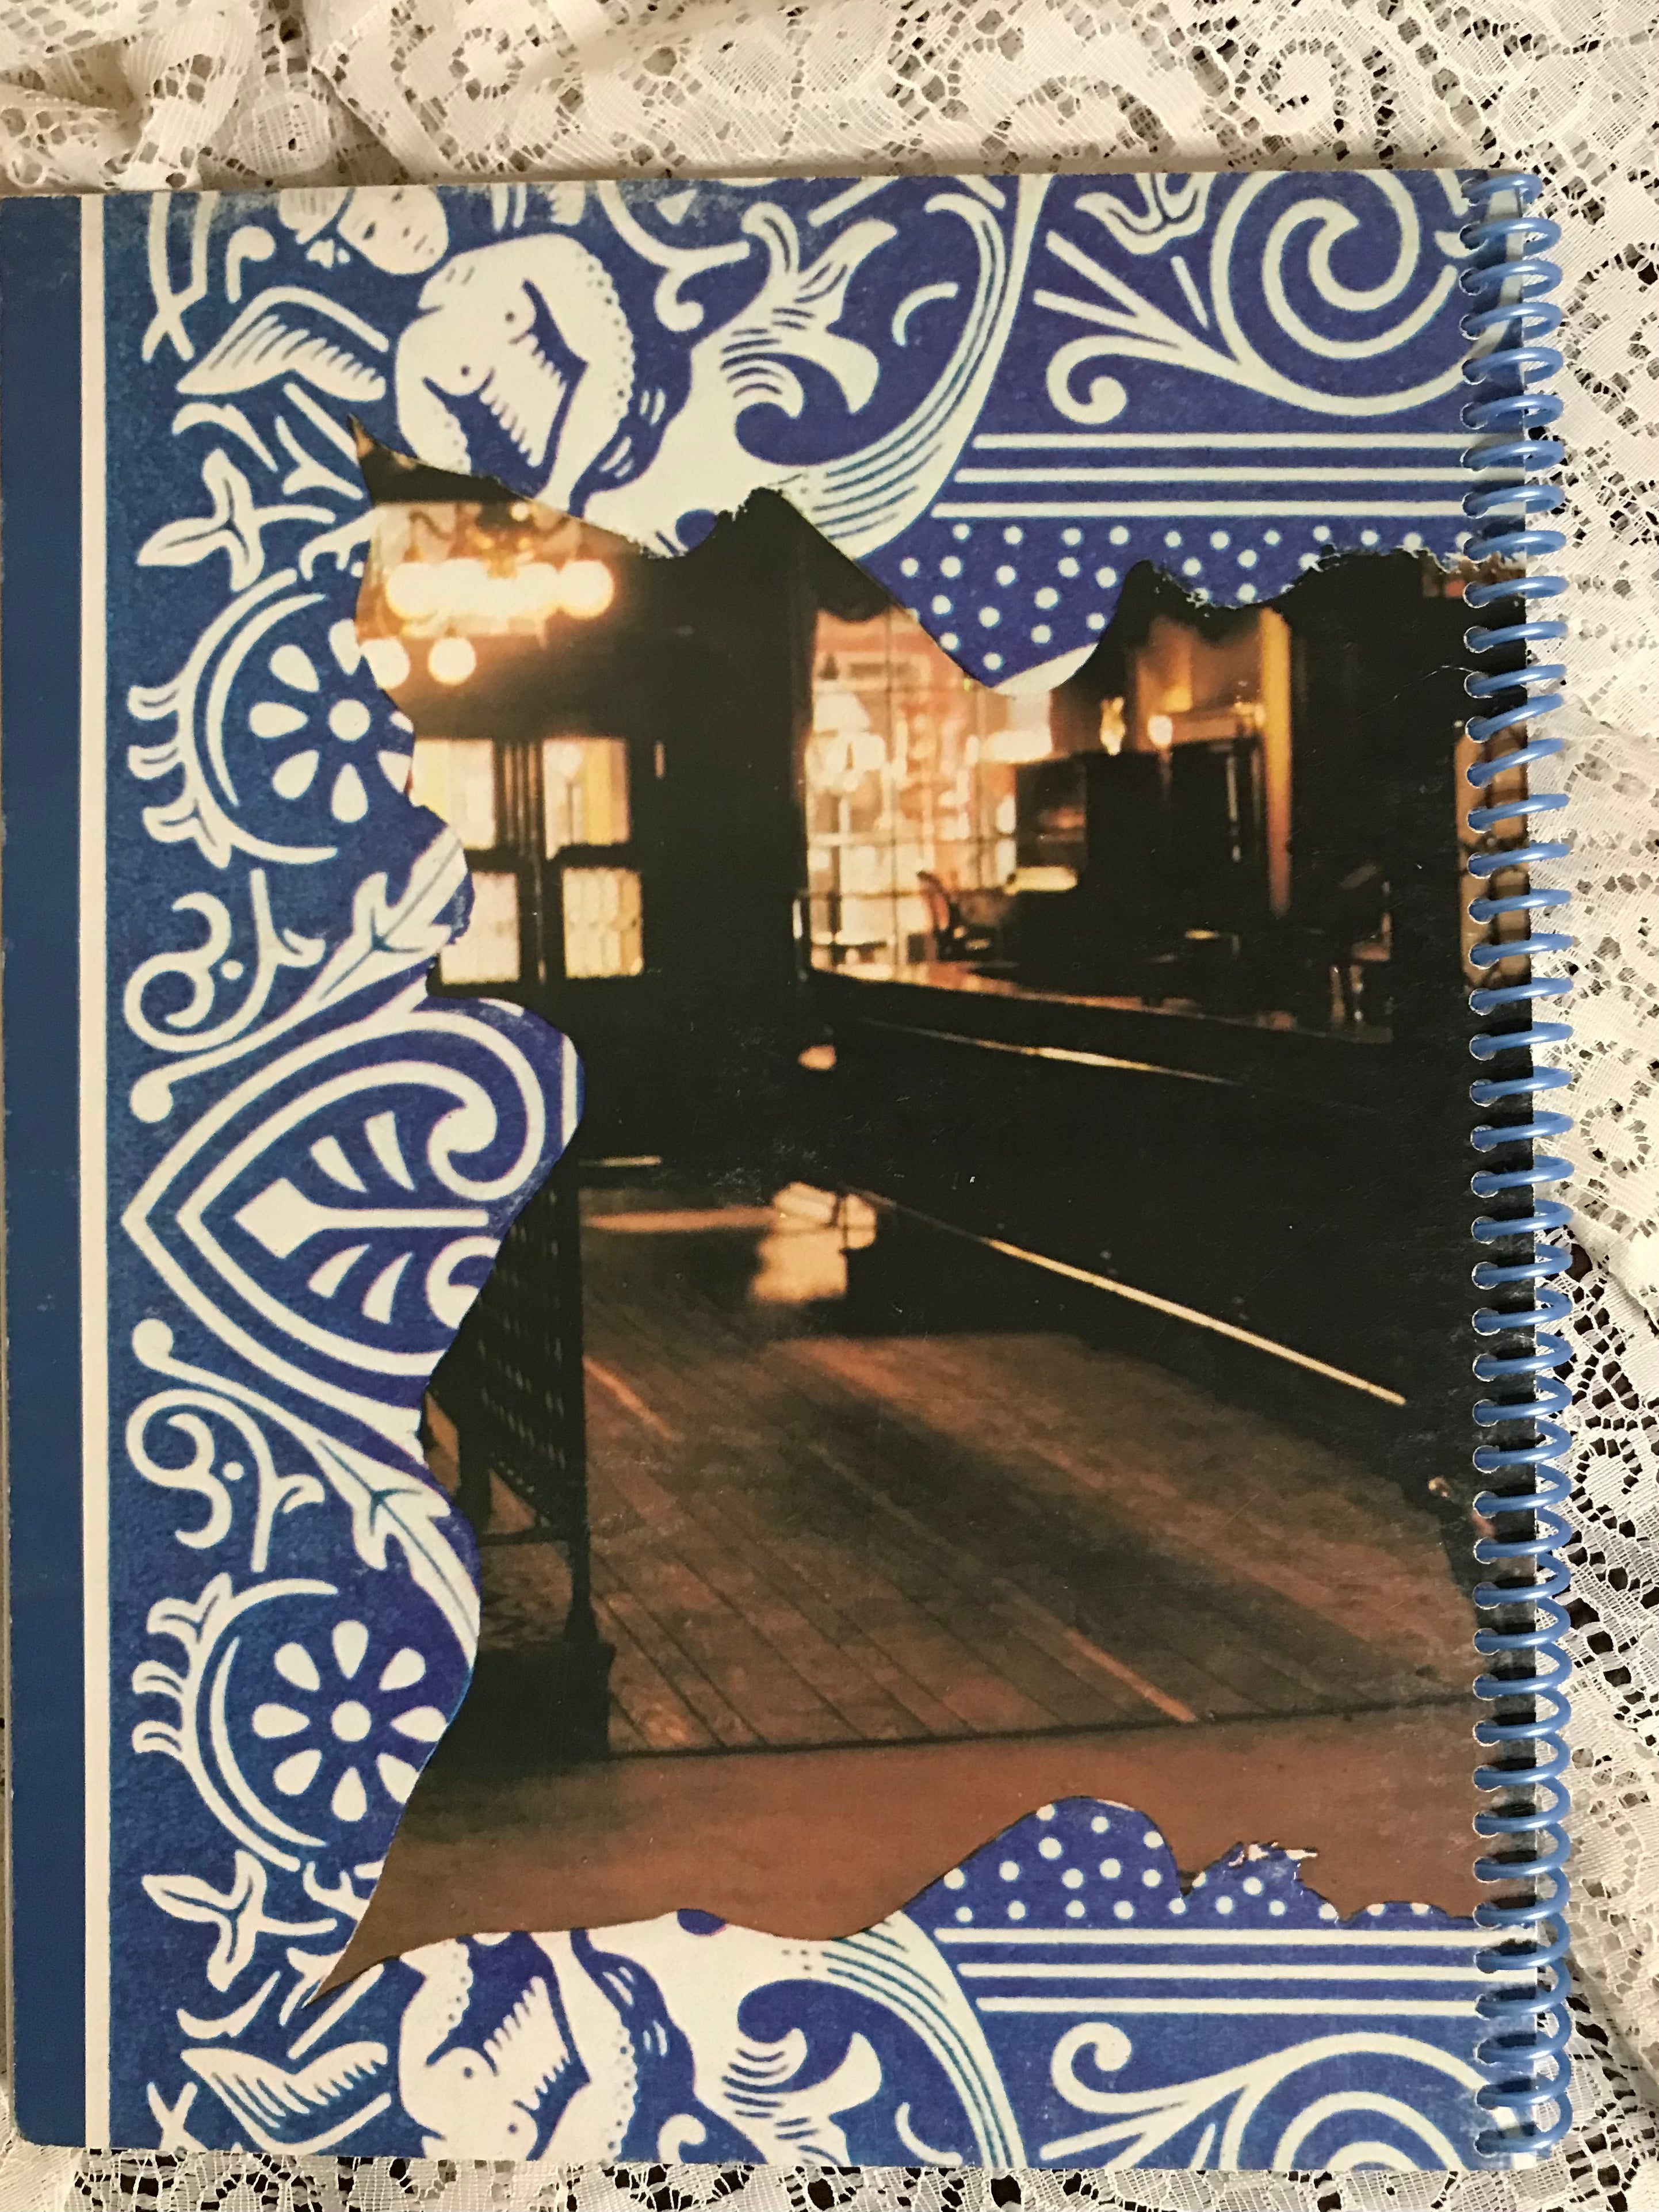 Allman Brothers Win, Lose Or Draw Album Cover Notebook